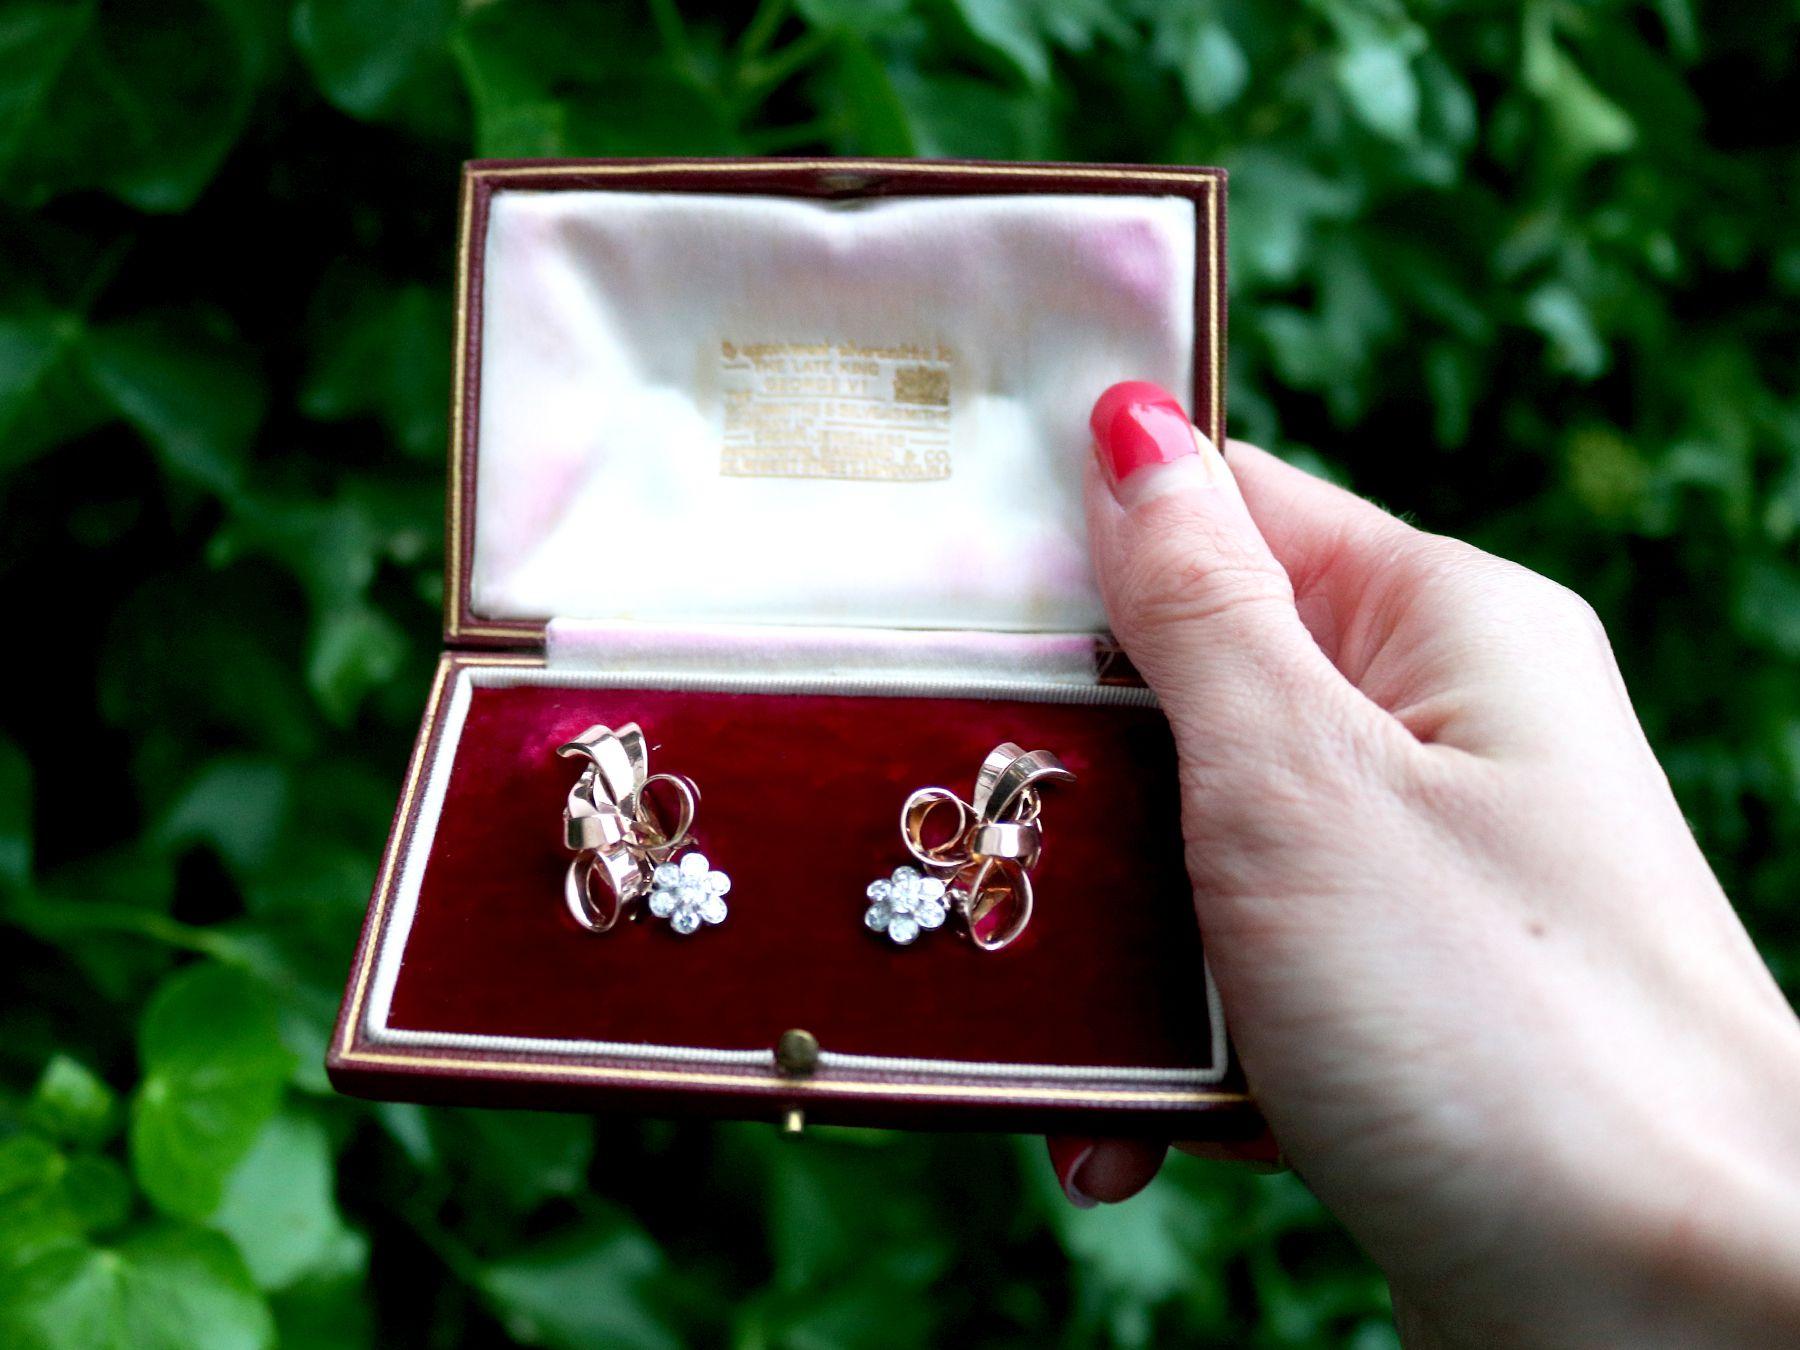 A stunning, fine and impressive pair of antique 1.00 carat diamond, 15 and 12 karat rose gold, platinum set clip on earrings; part of our antique jewellery and estate jewelry collections.

These stunning, fine and impressive antique earrings are